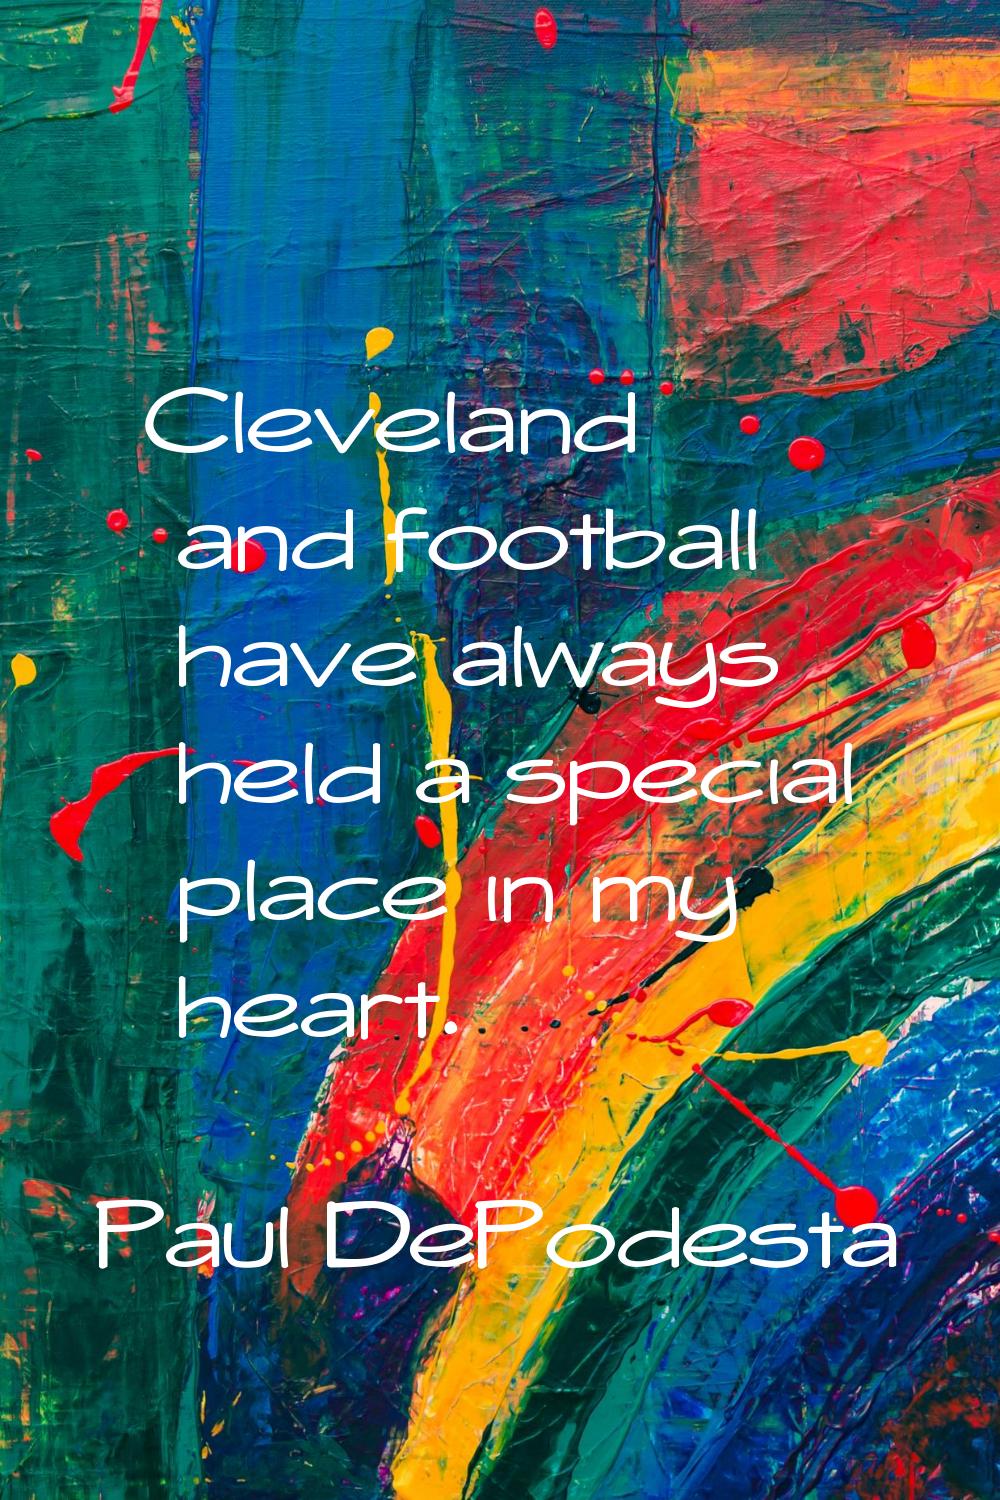 Cleveland and football have always held a special place in my heart.